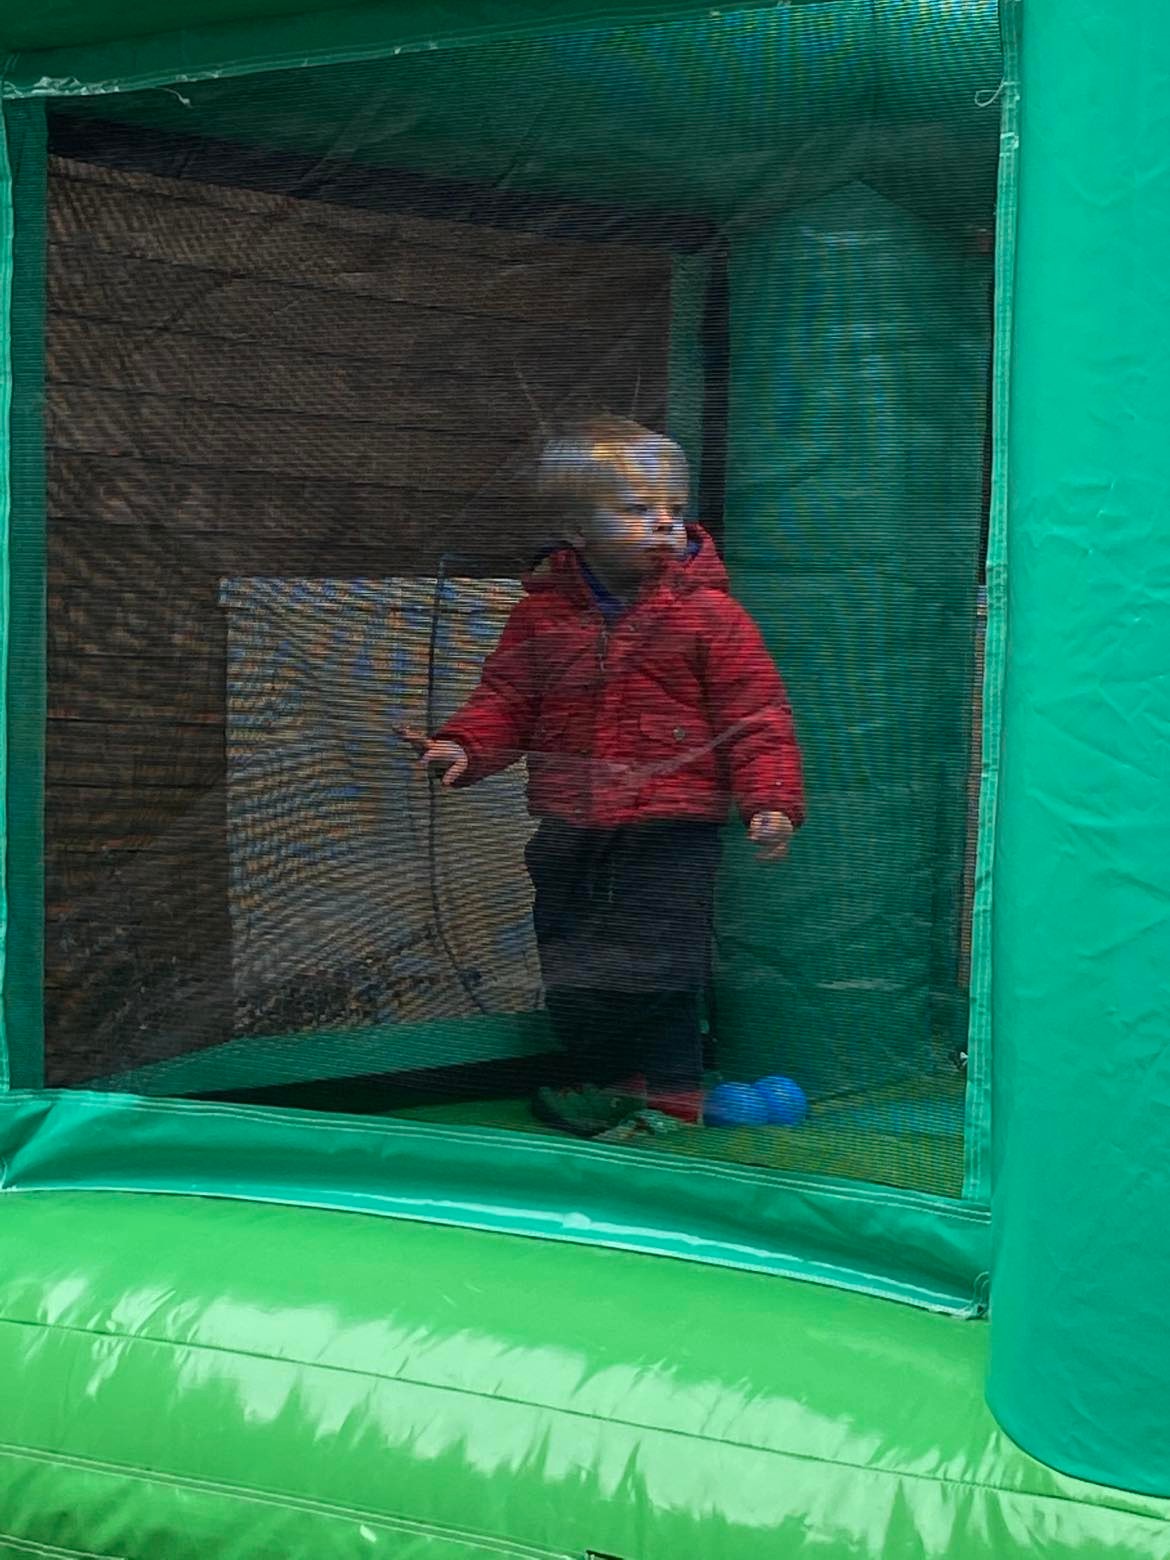 An image of my son, Teddy, using a small bouncy castle at home at 3 years old.